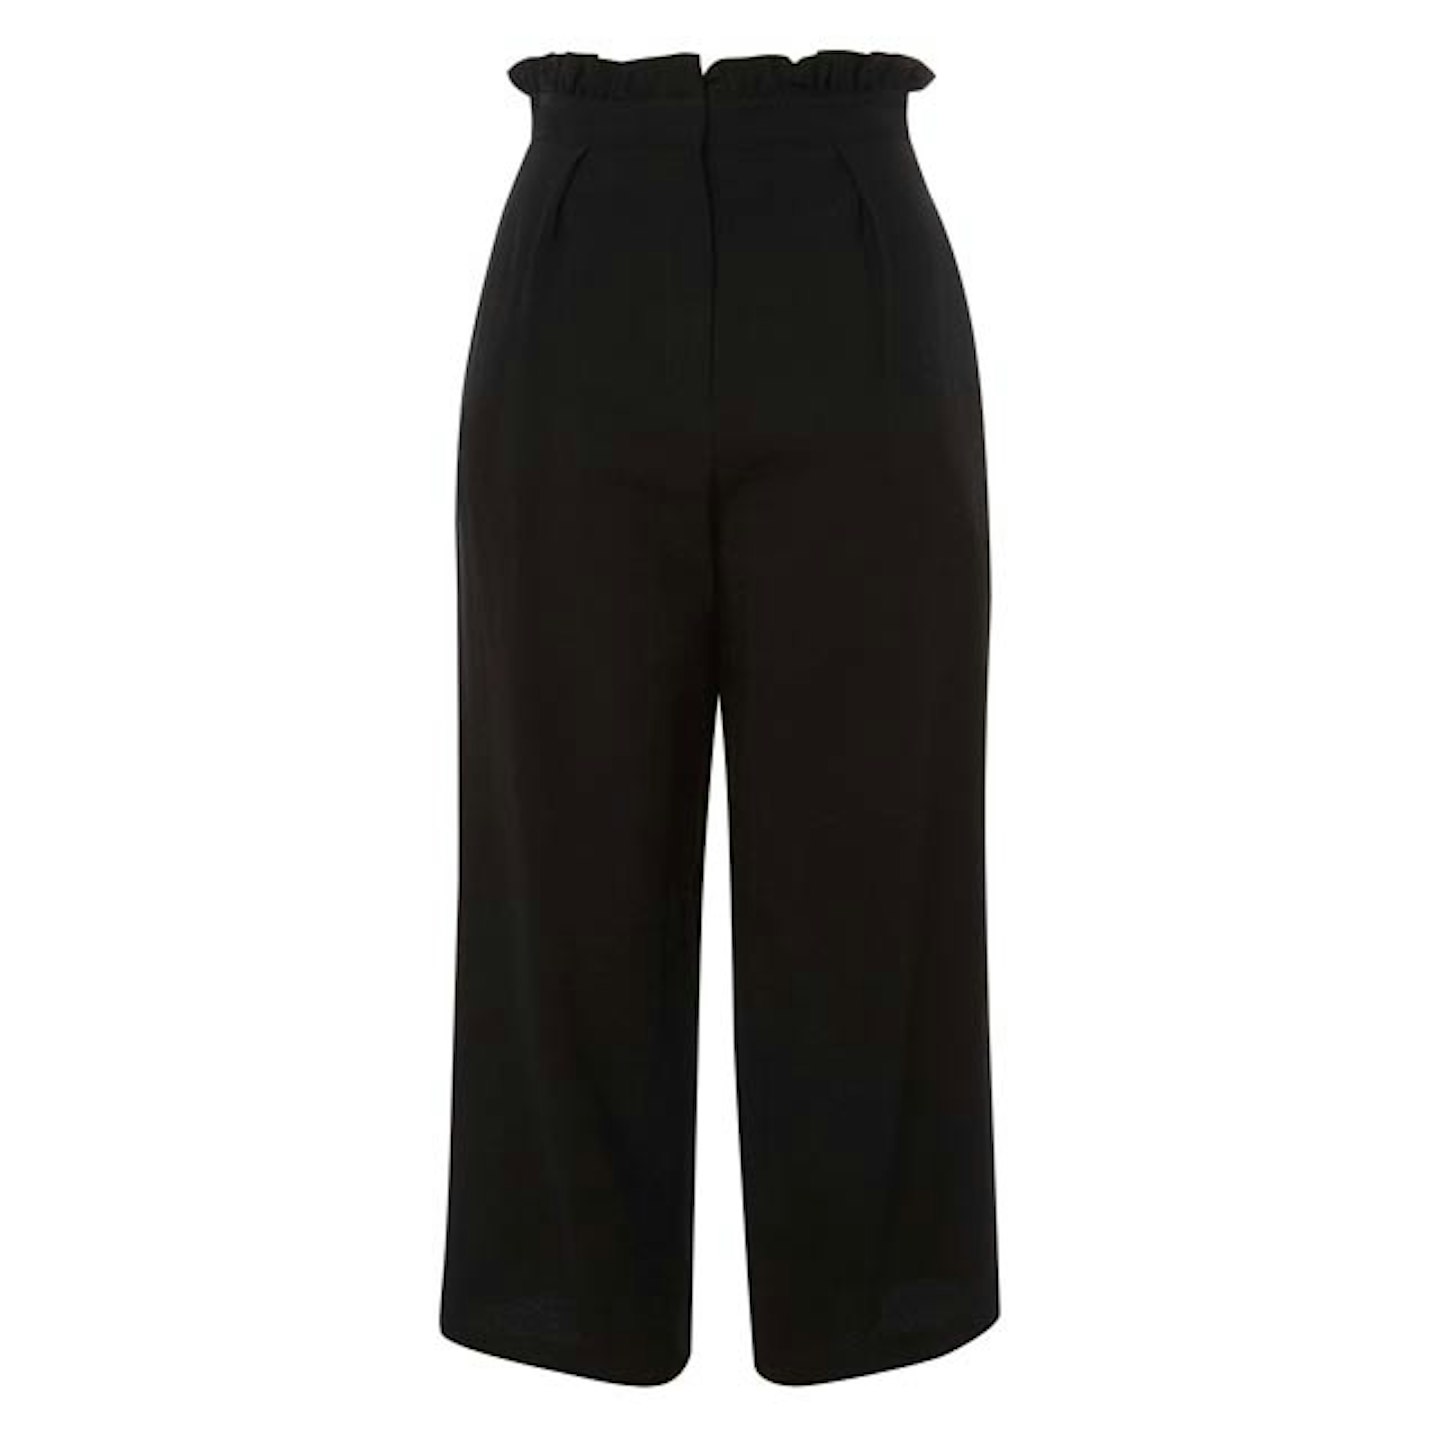 Topshop paperbag trousers